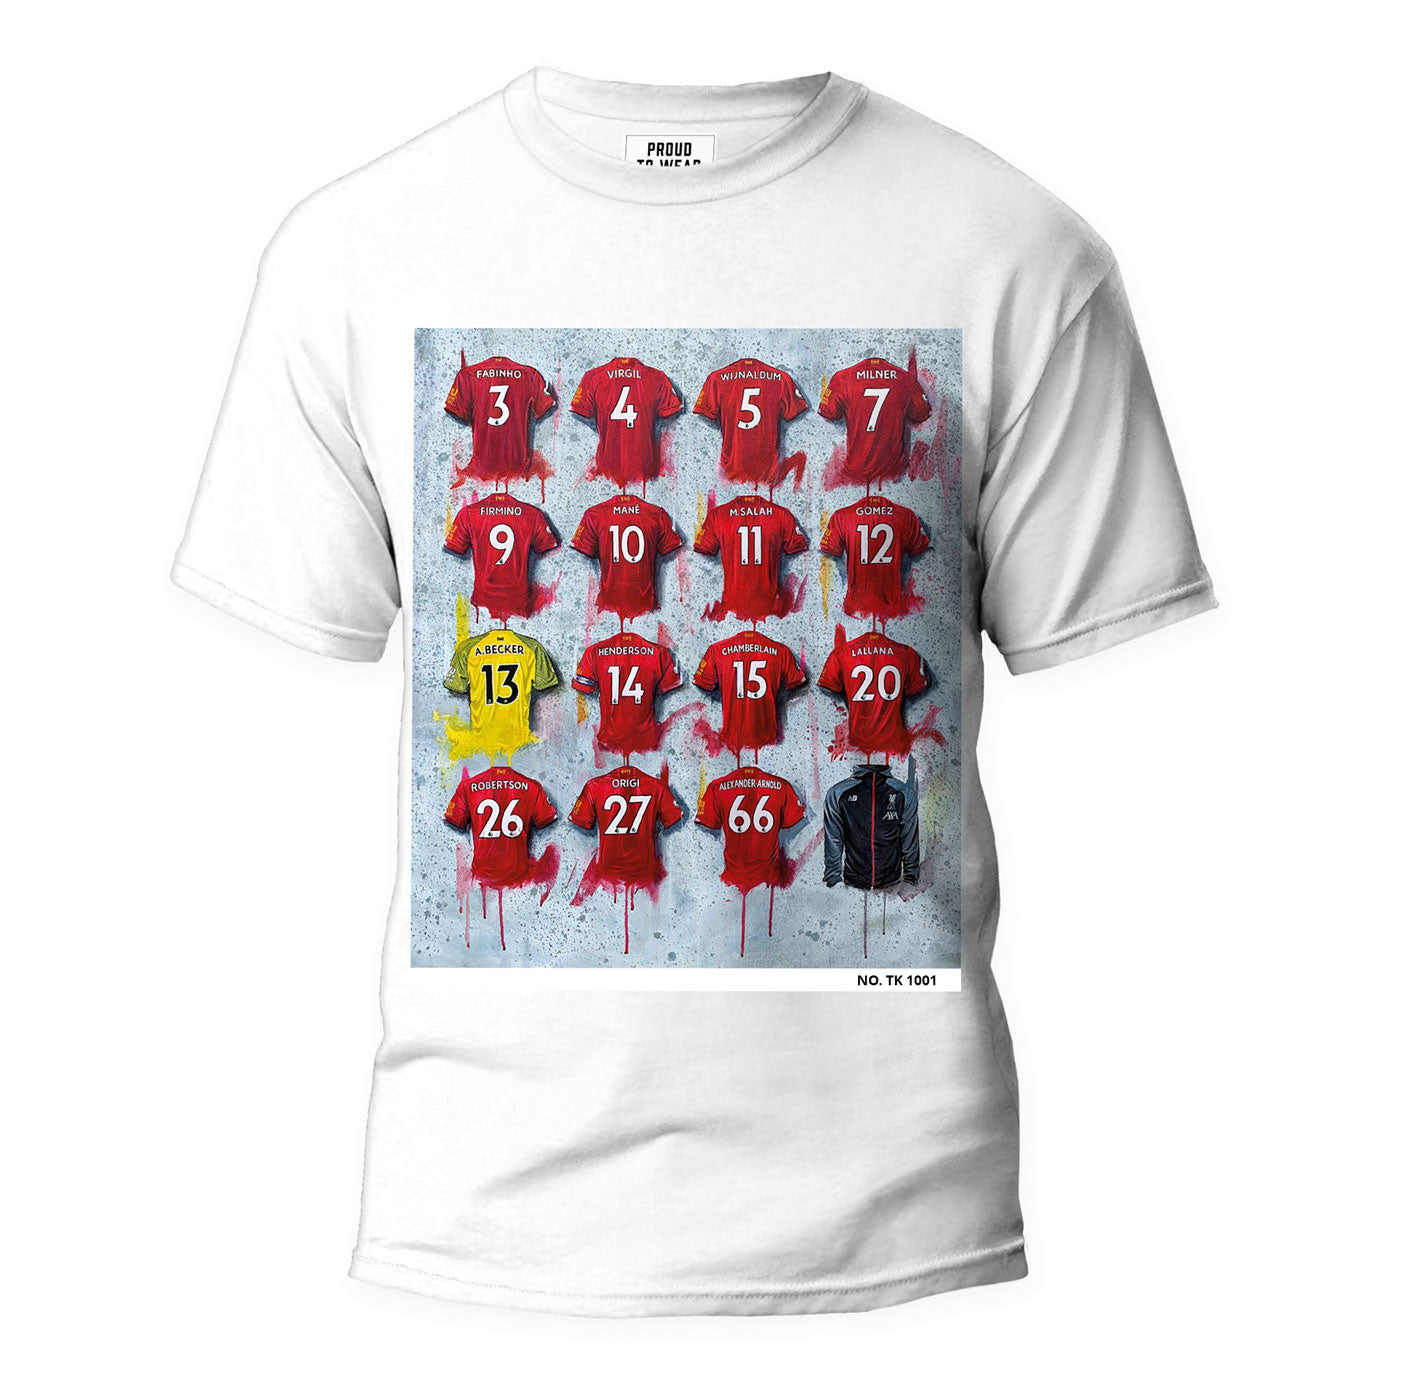 Liverpool FC Shirts - A Champions Collection T Shirt